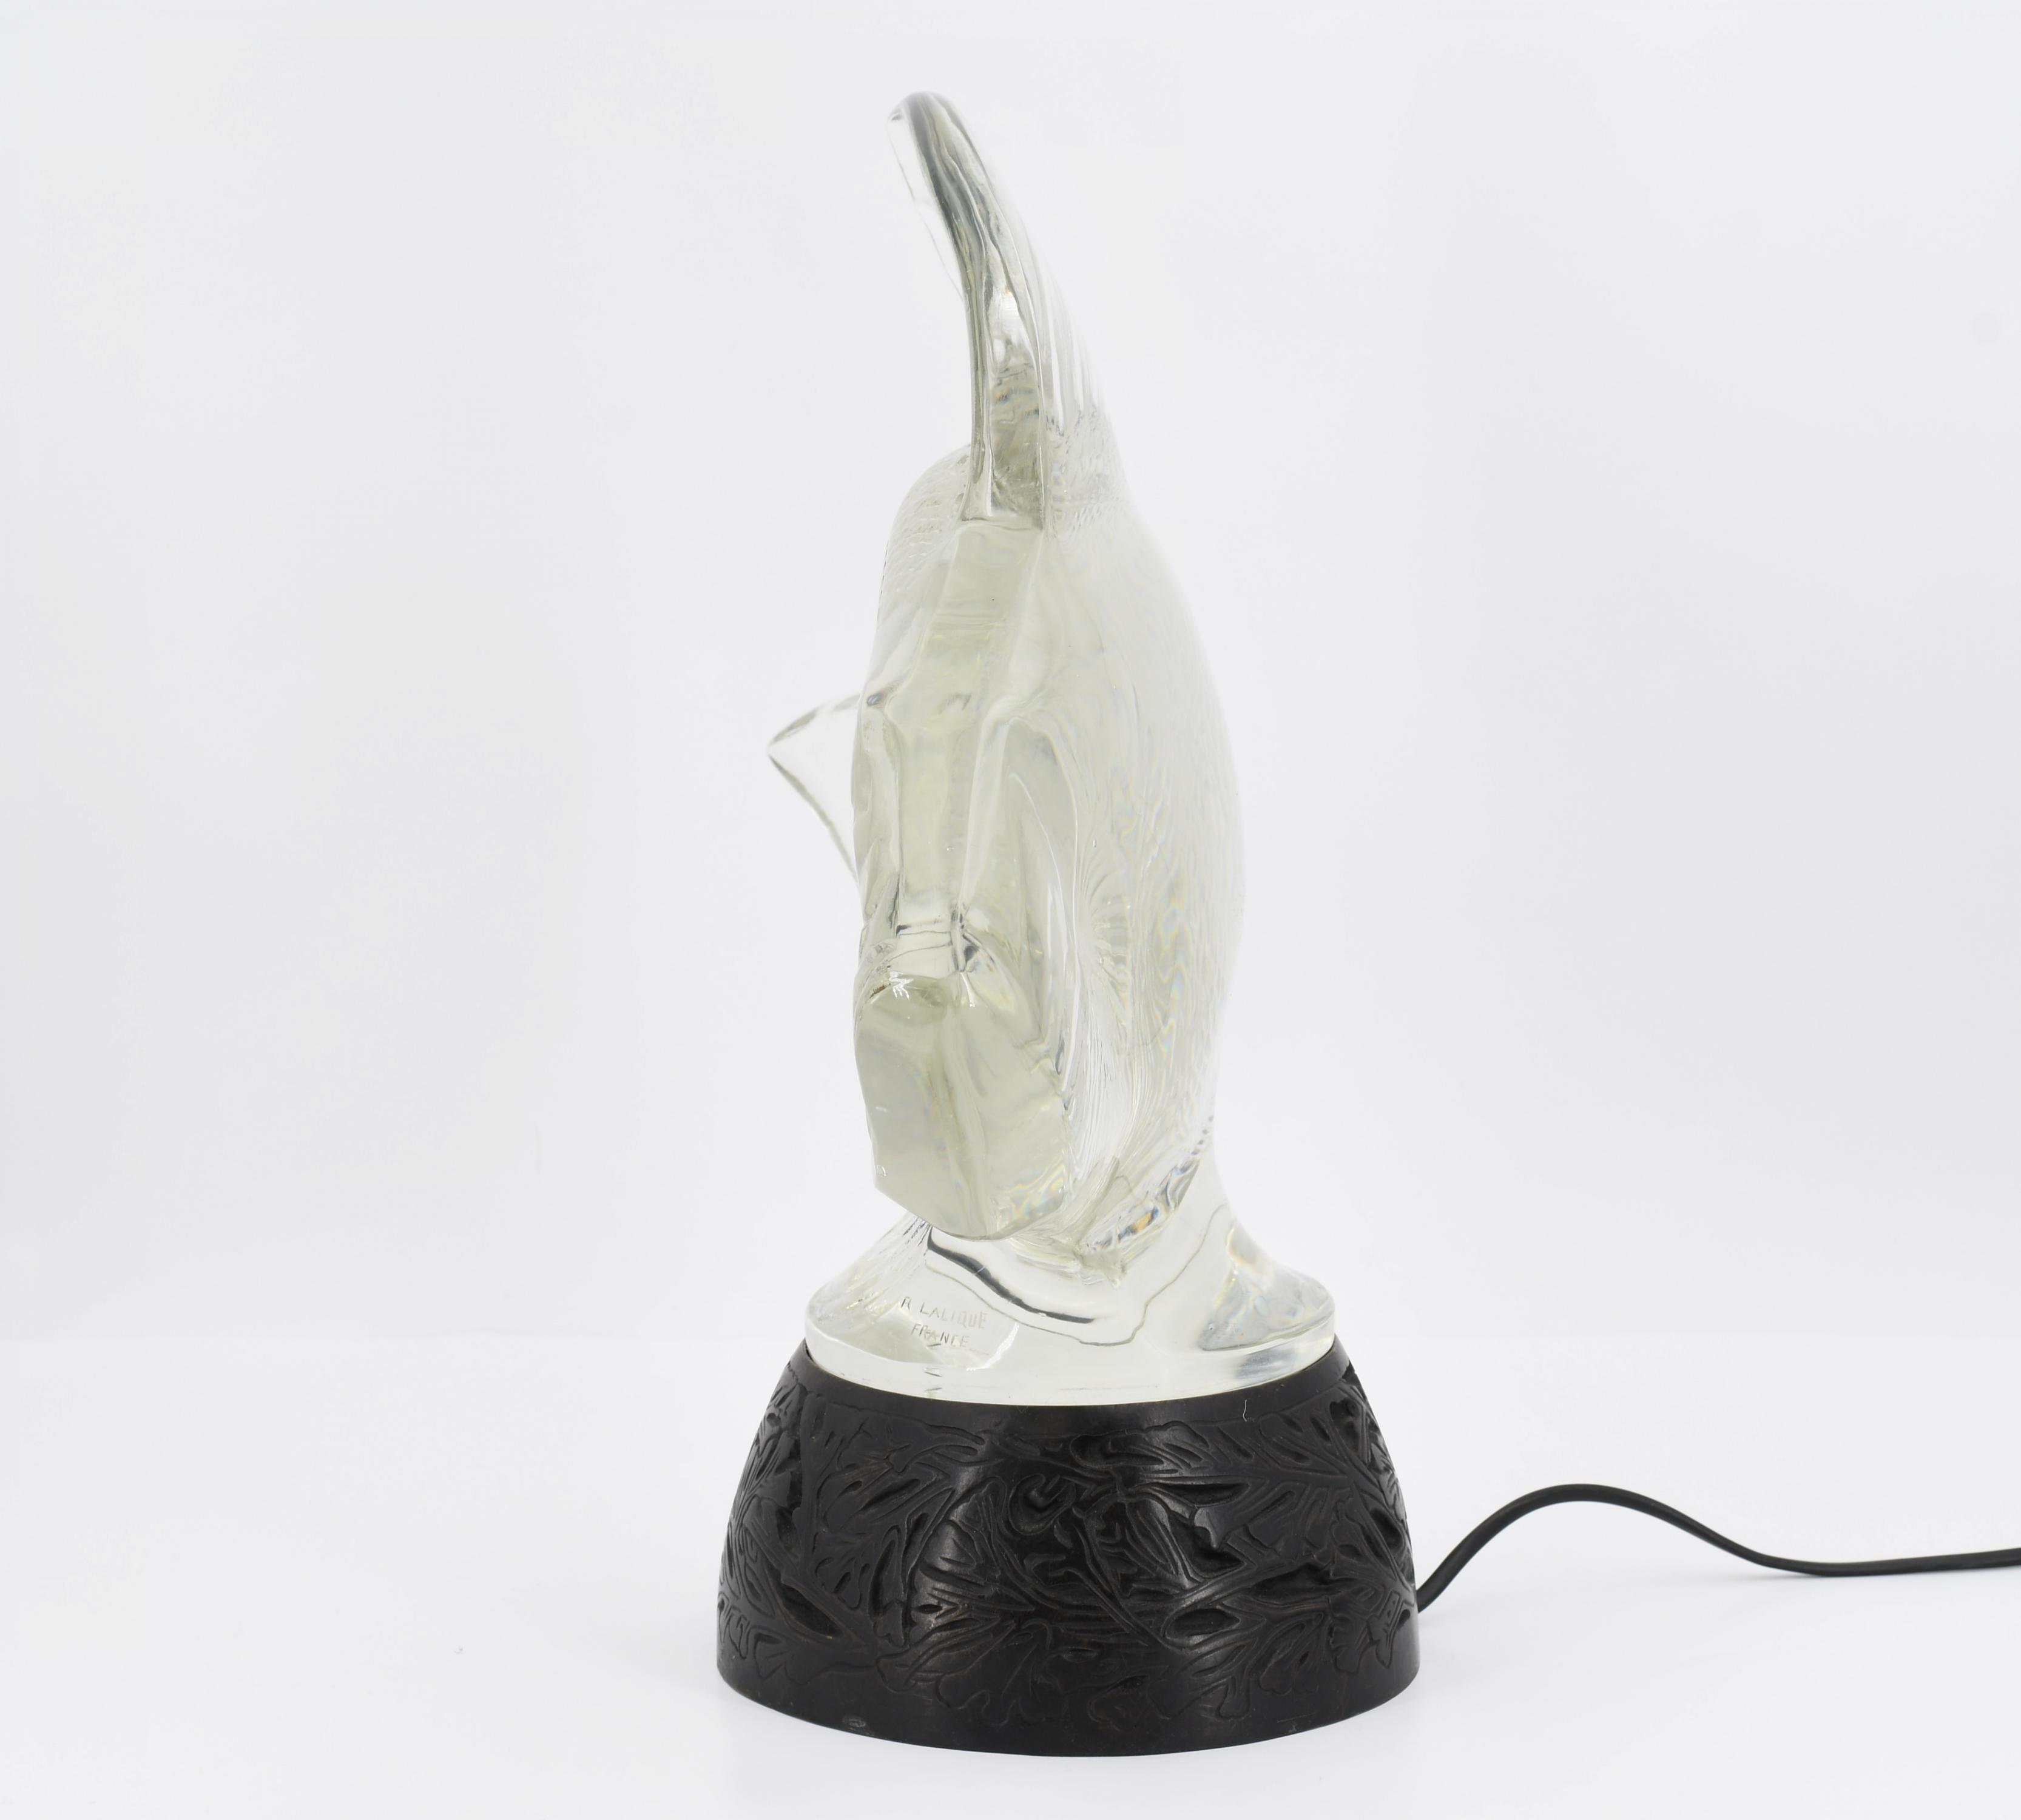 Table lamp "Gros Poisson, Vagues" - Image 3 of 6